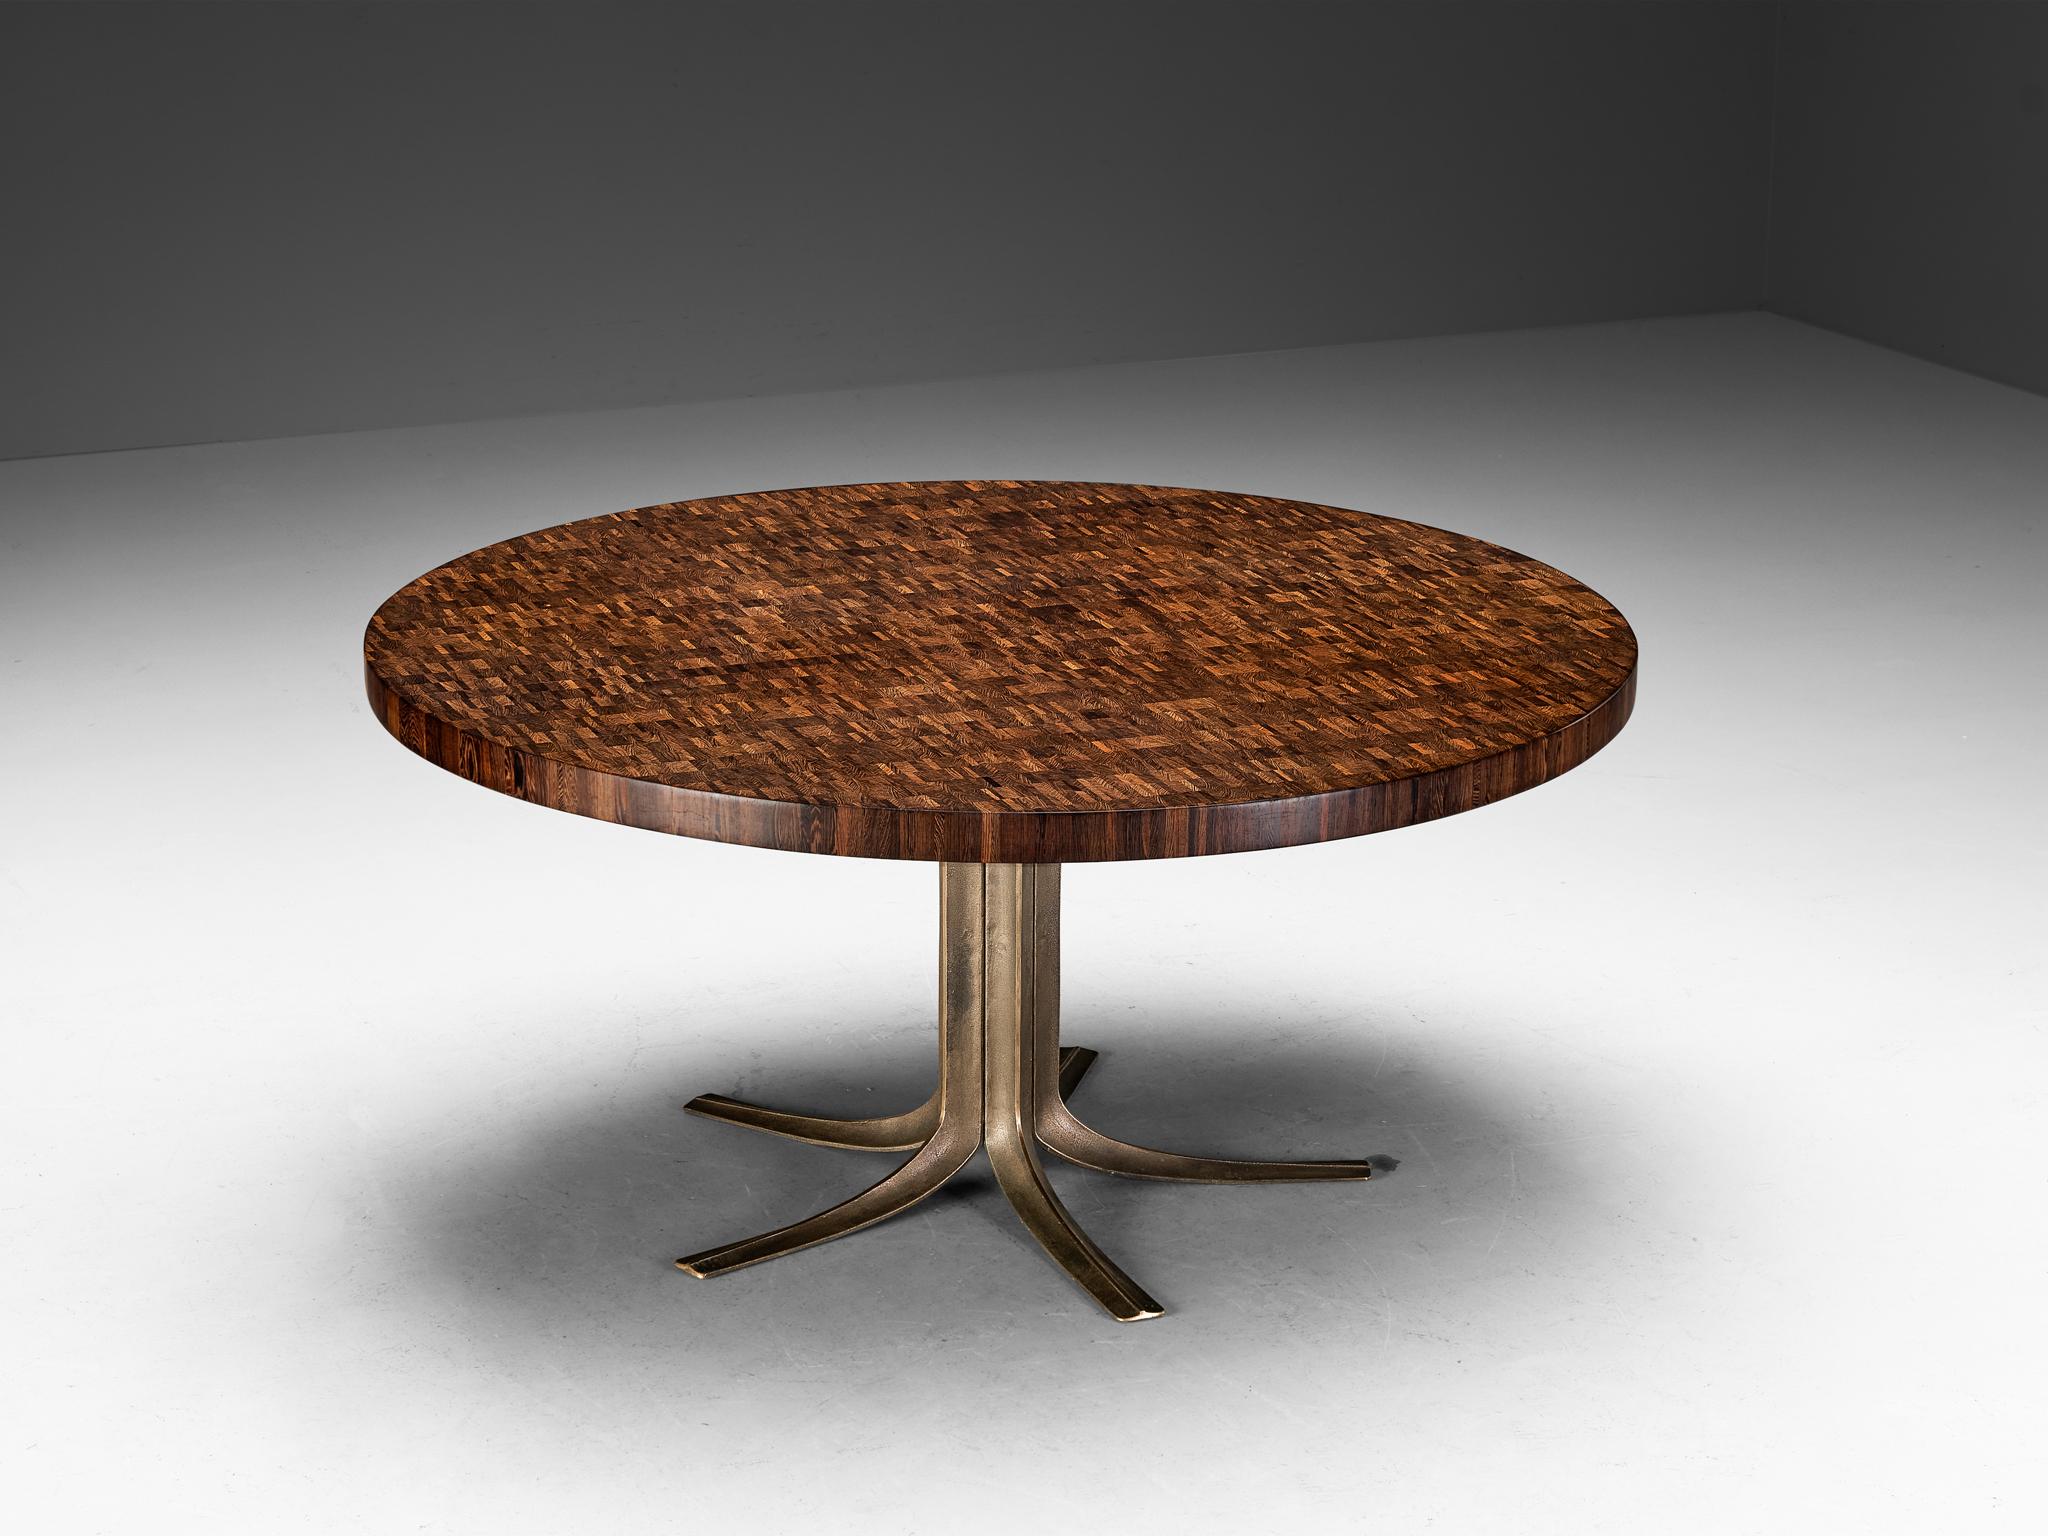 Jules Wabbes, dining table or center table, bronze, end-grain wengé, Belgium, 1960s 

Jules Wabbes created an outstanding piece of furniture that deserves a prominent place in one's living room. The tabletop owes its intricate appearance due to the